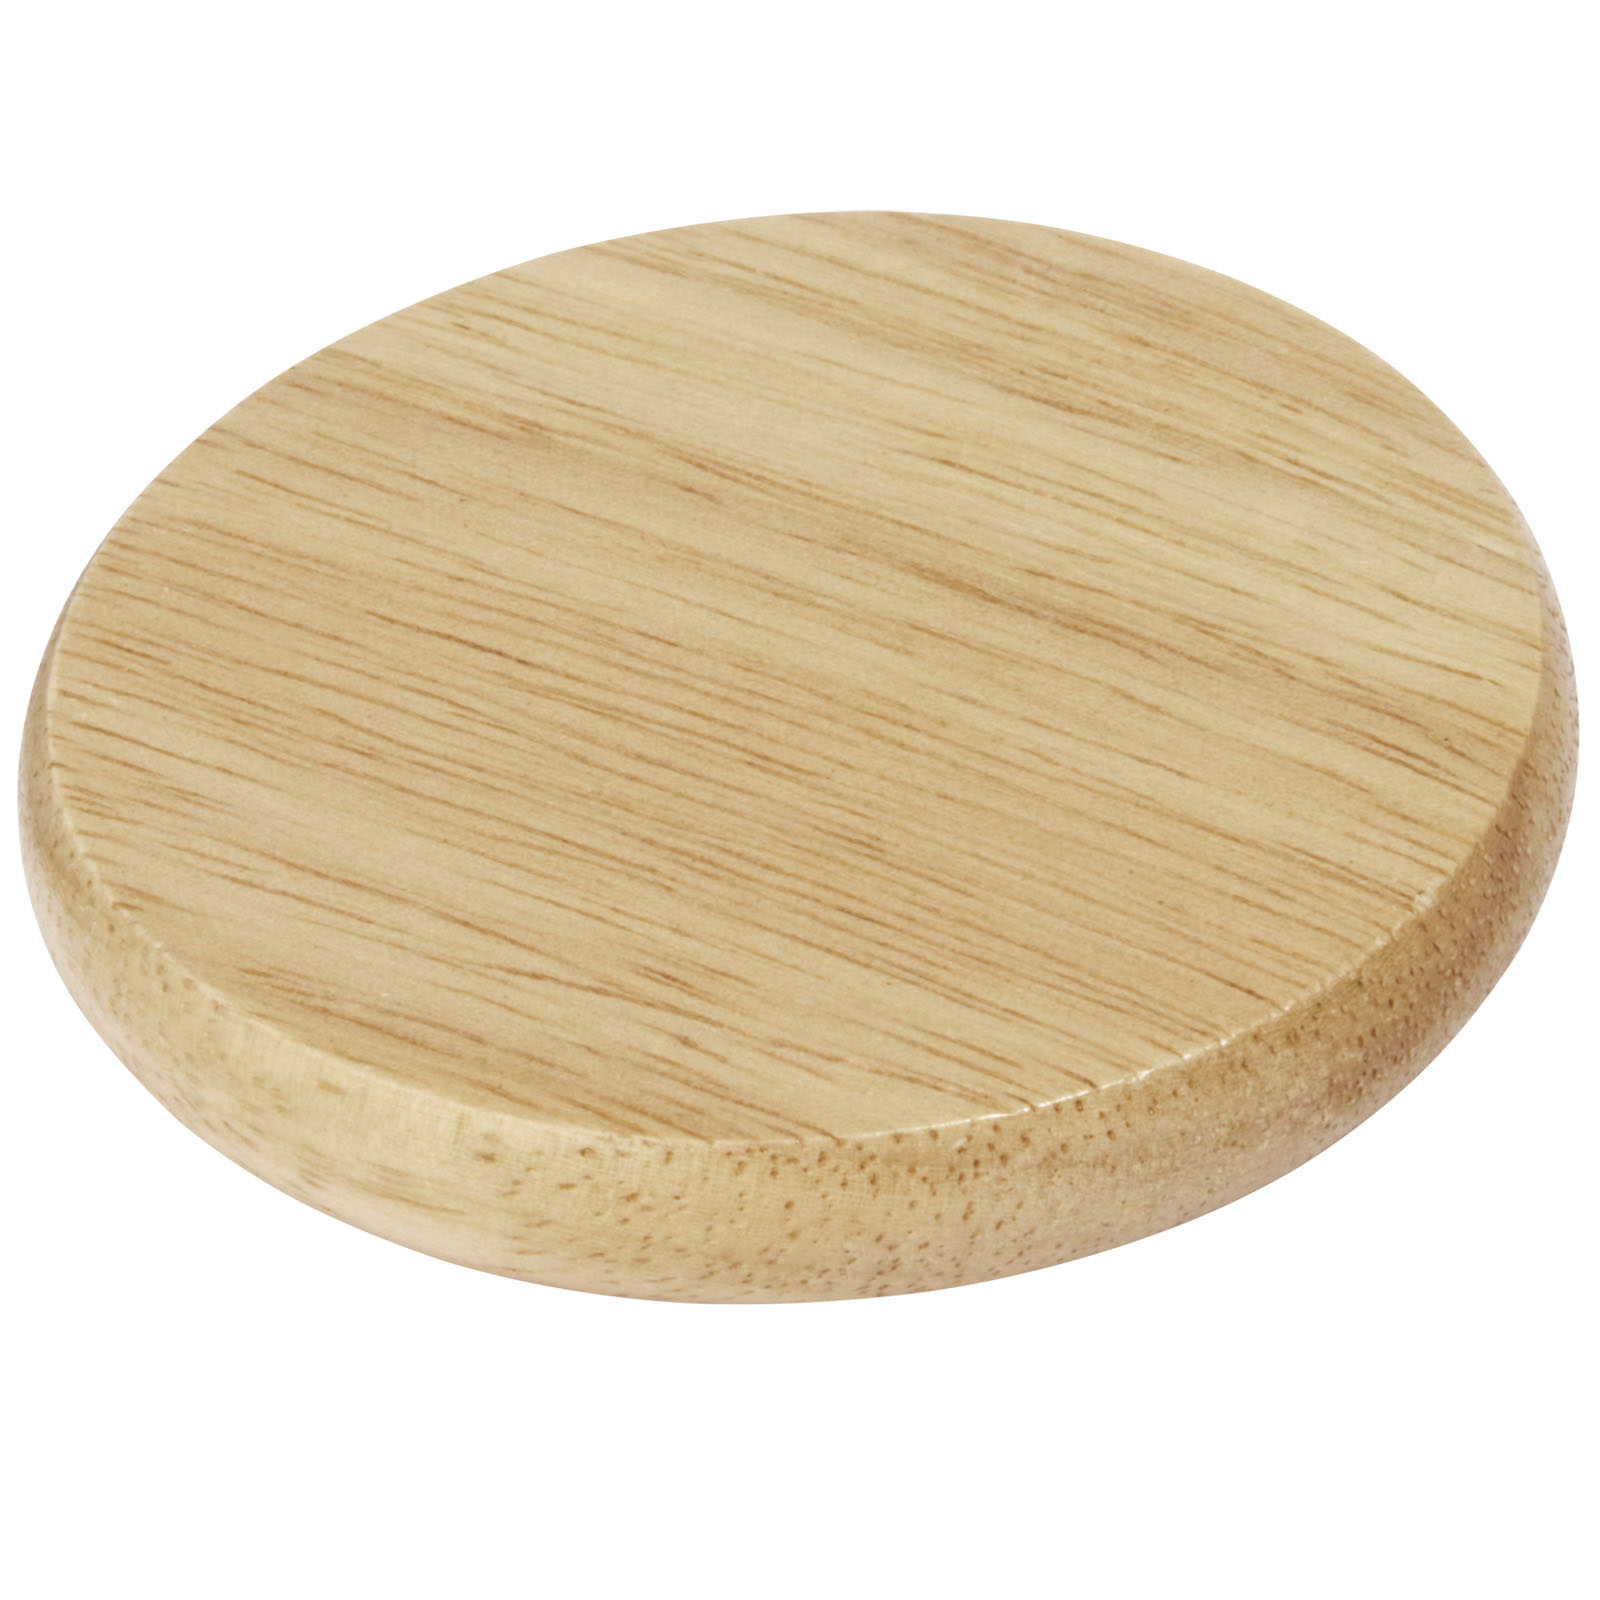 Bottle Openers & Accessories - Scoll wooden coaster with bottle opener